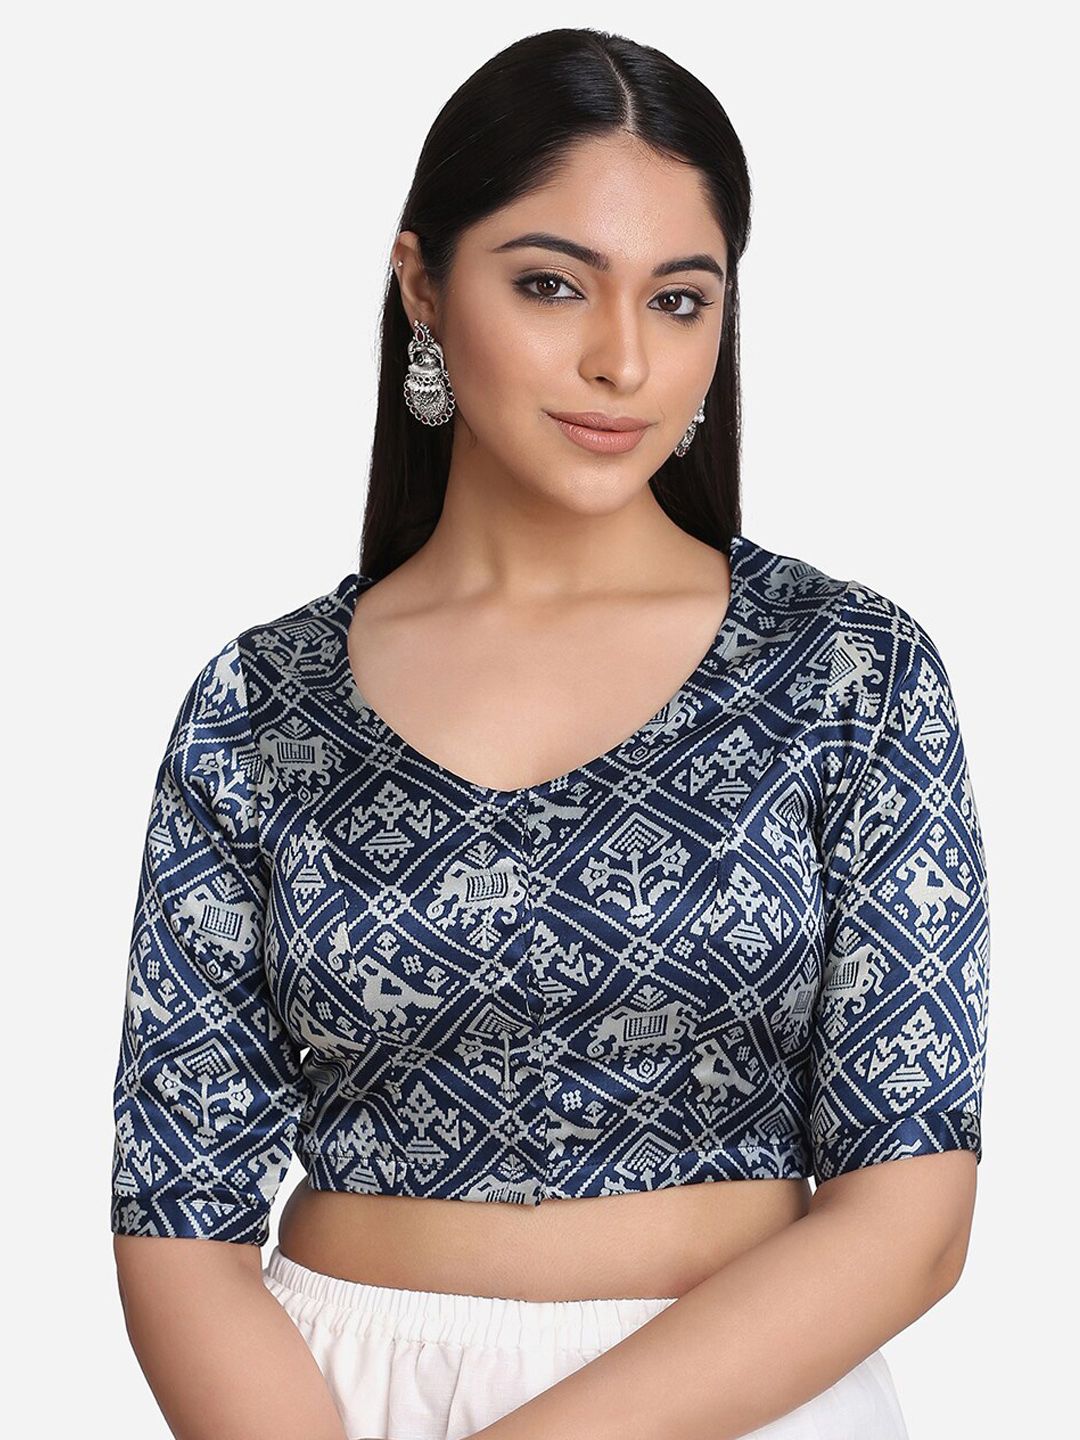 THE WEAVE TRAVELLER Blue Printed Saree Blouse Price in India